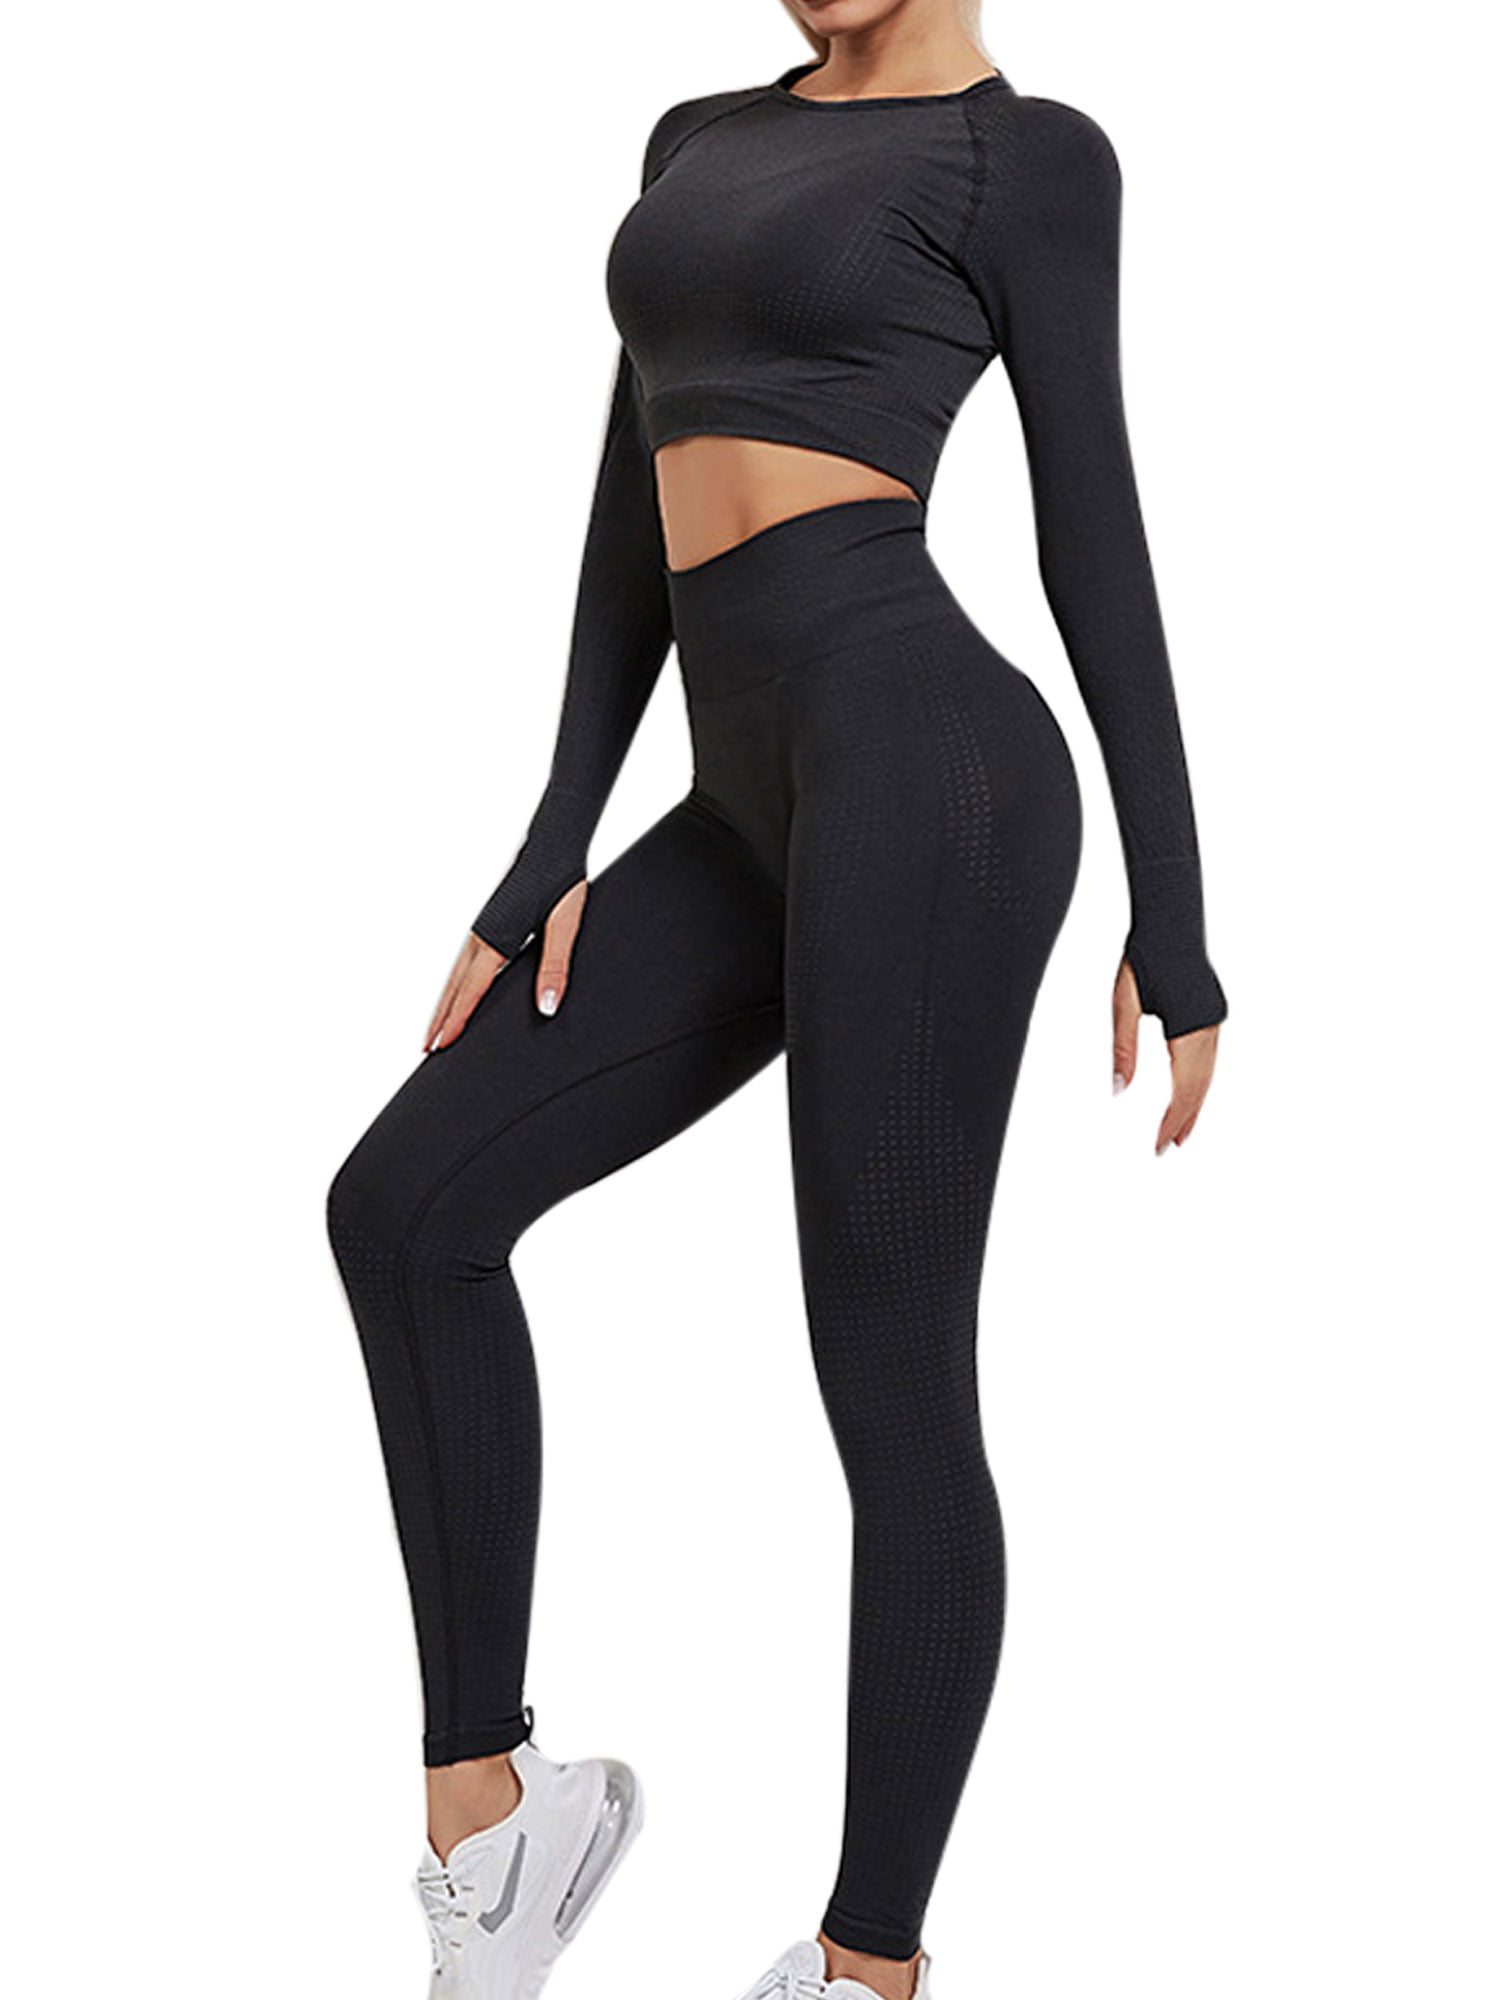 cooki Workout Outfits for Women 2 Piece Set Ribbed Seamless Crop Tank High Waist Yoga Leggings Sets Yoga Outfits Biker Sports